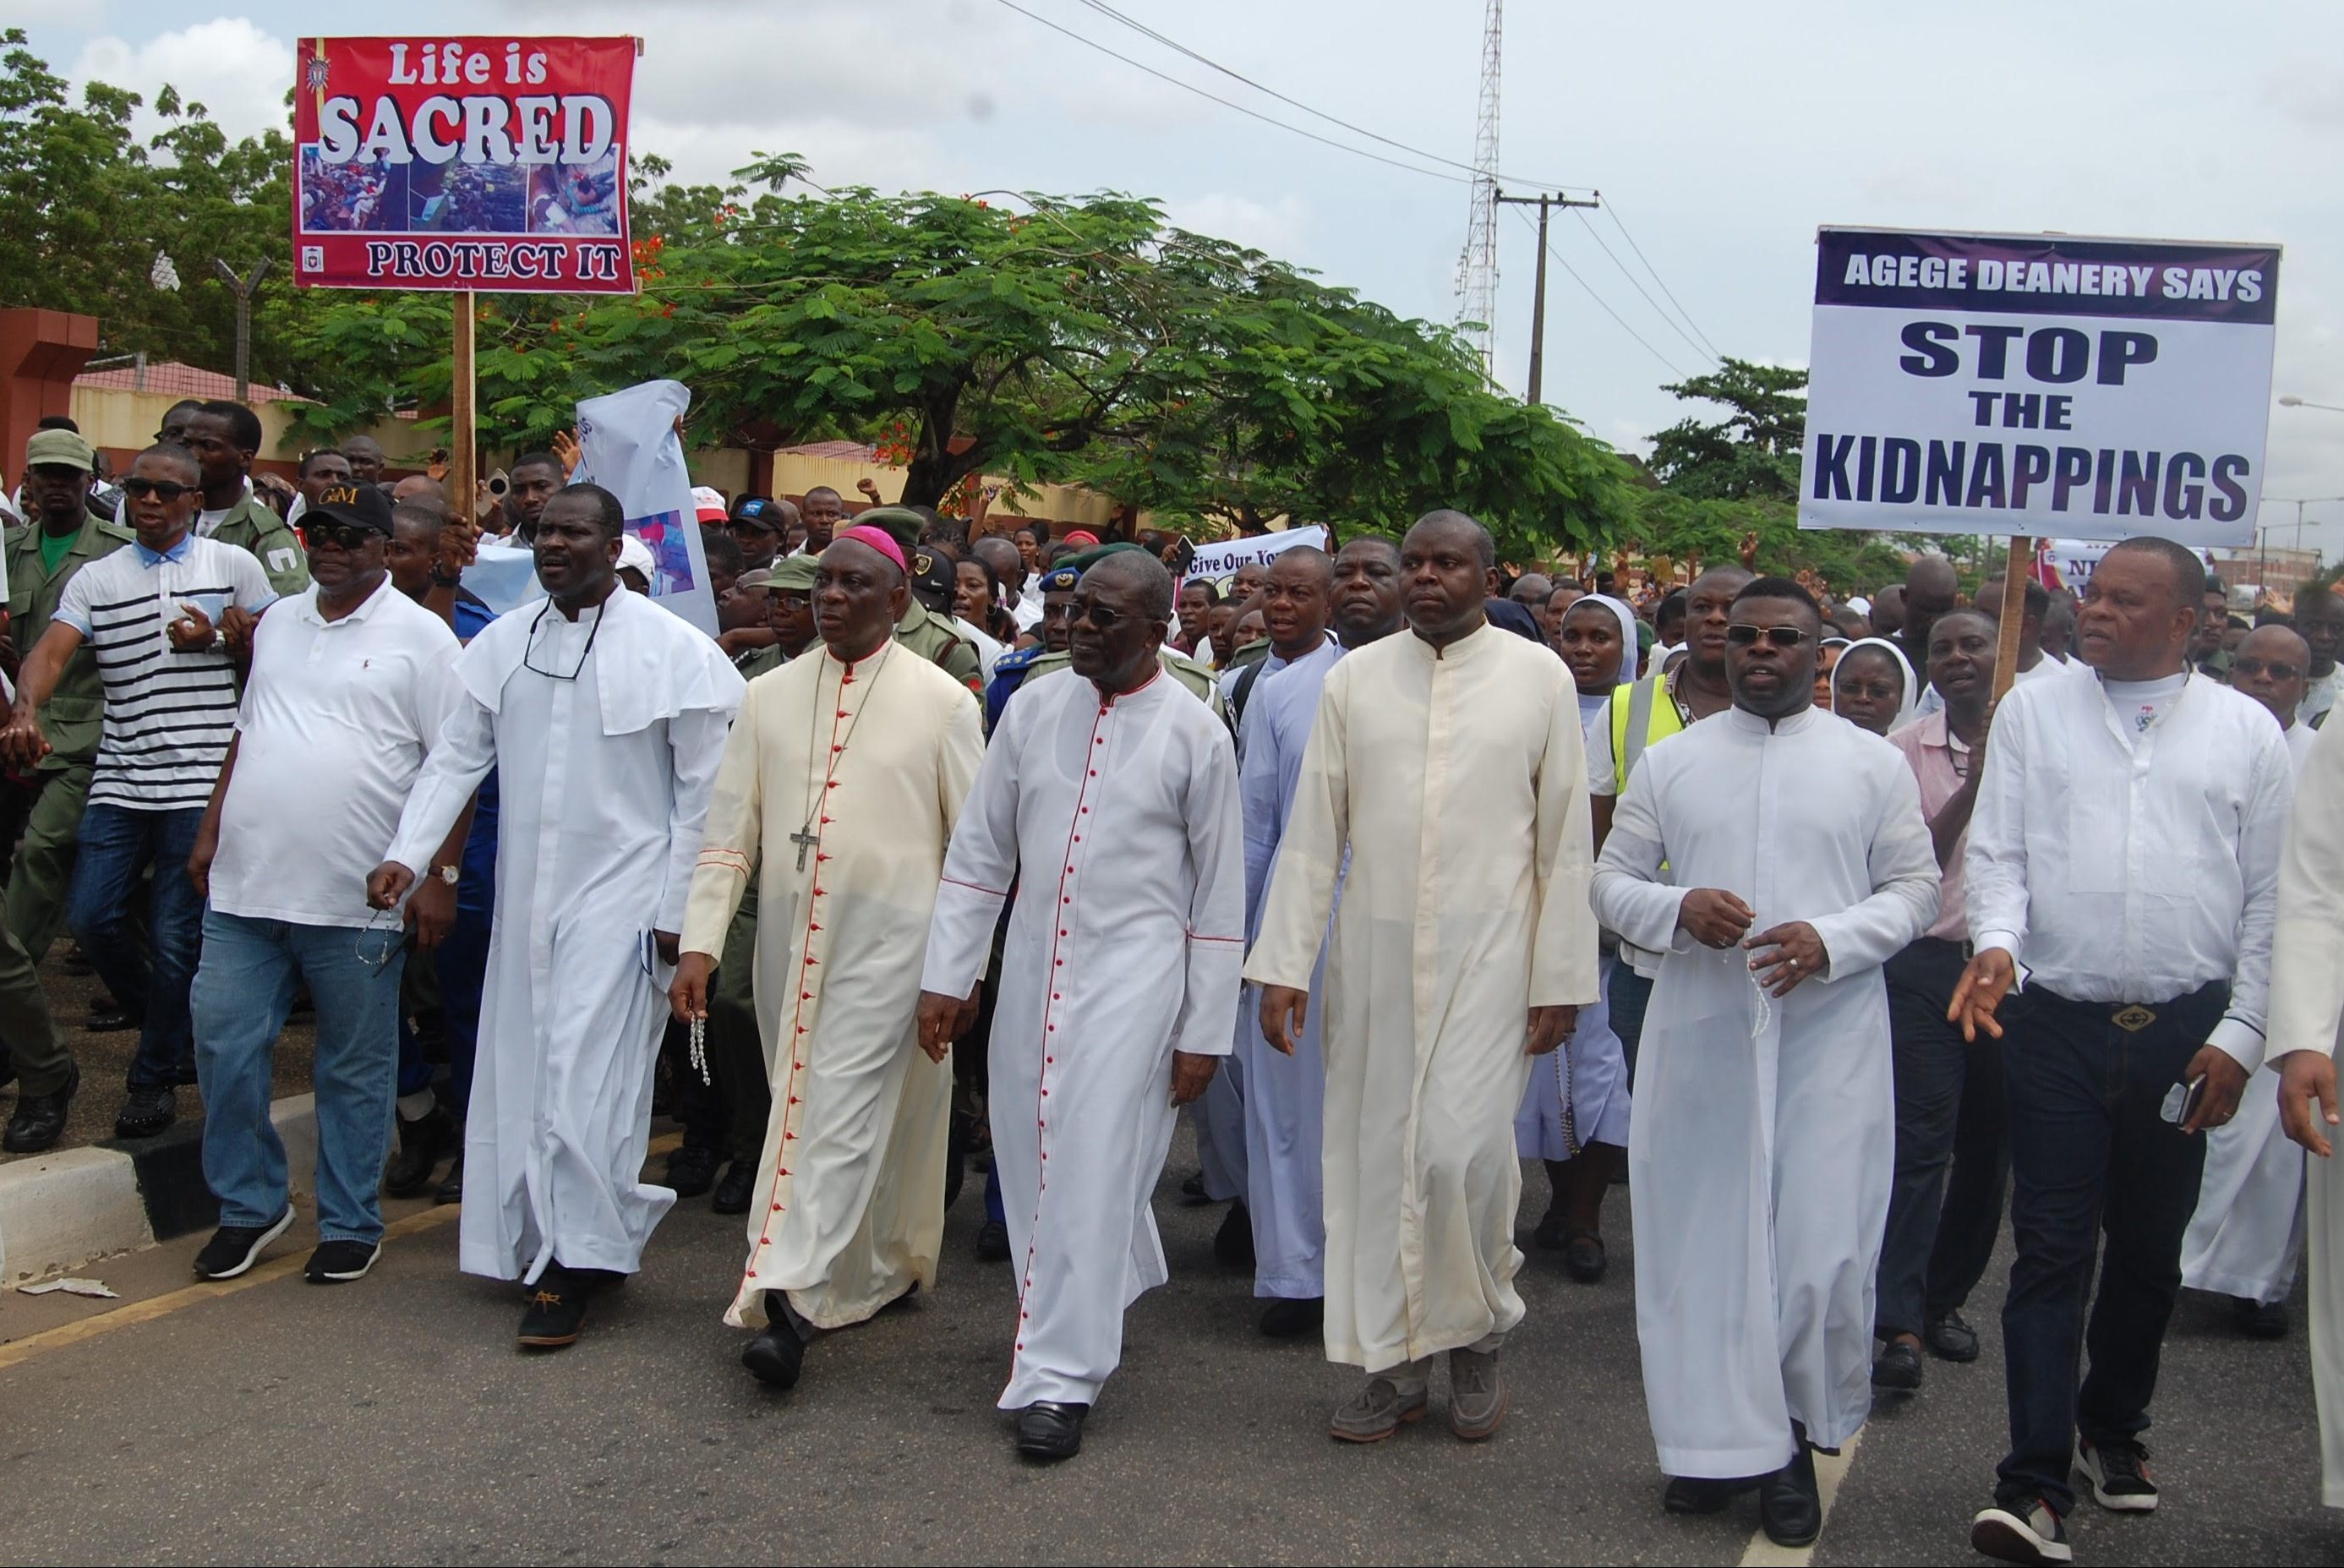 PHOTOS OF THE DAY: Funeral mass for slain priests, others as Catholics protest